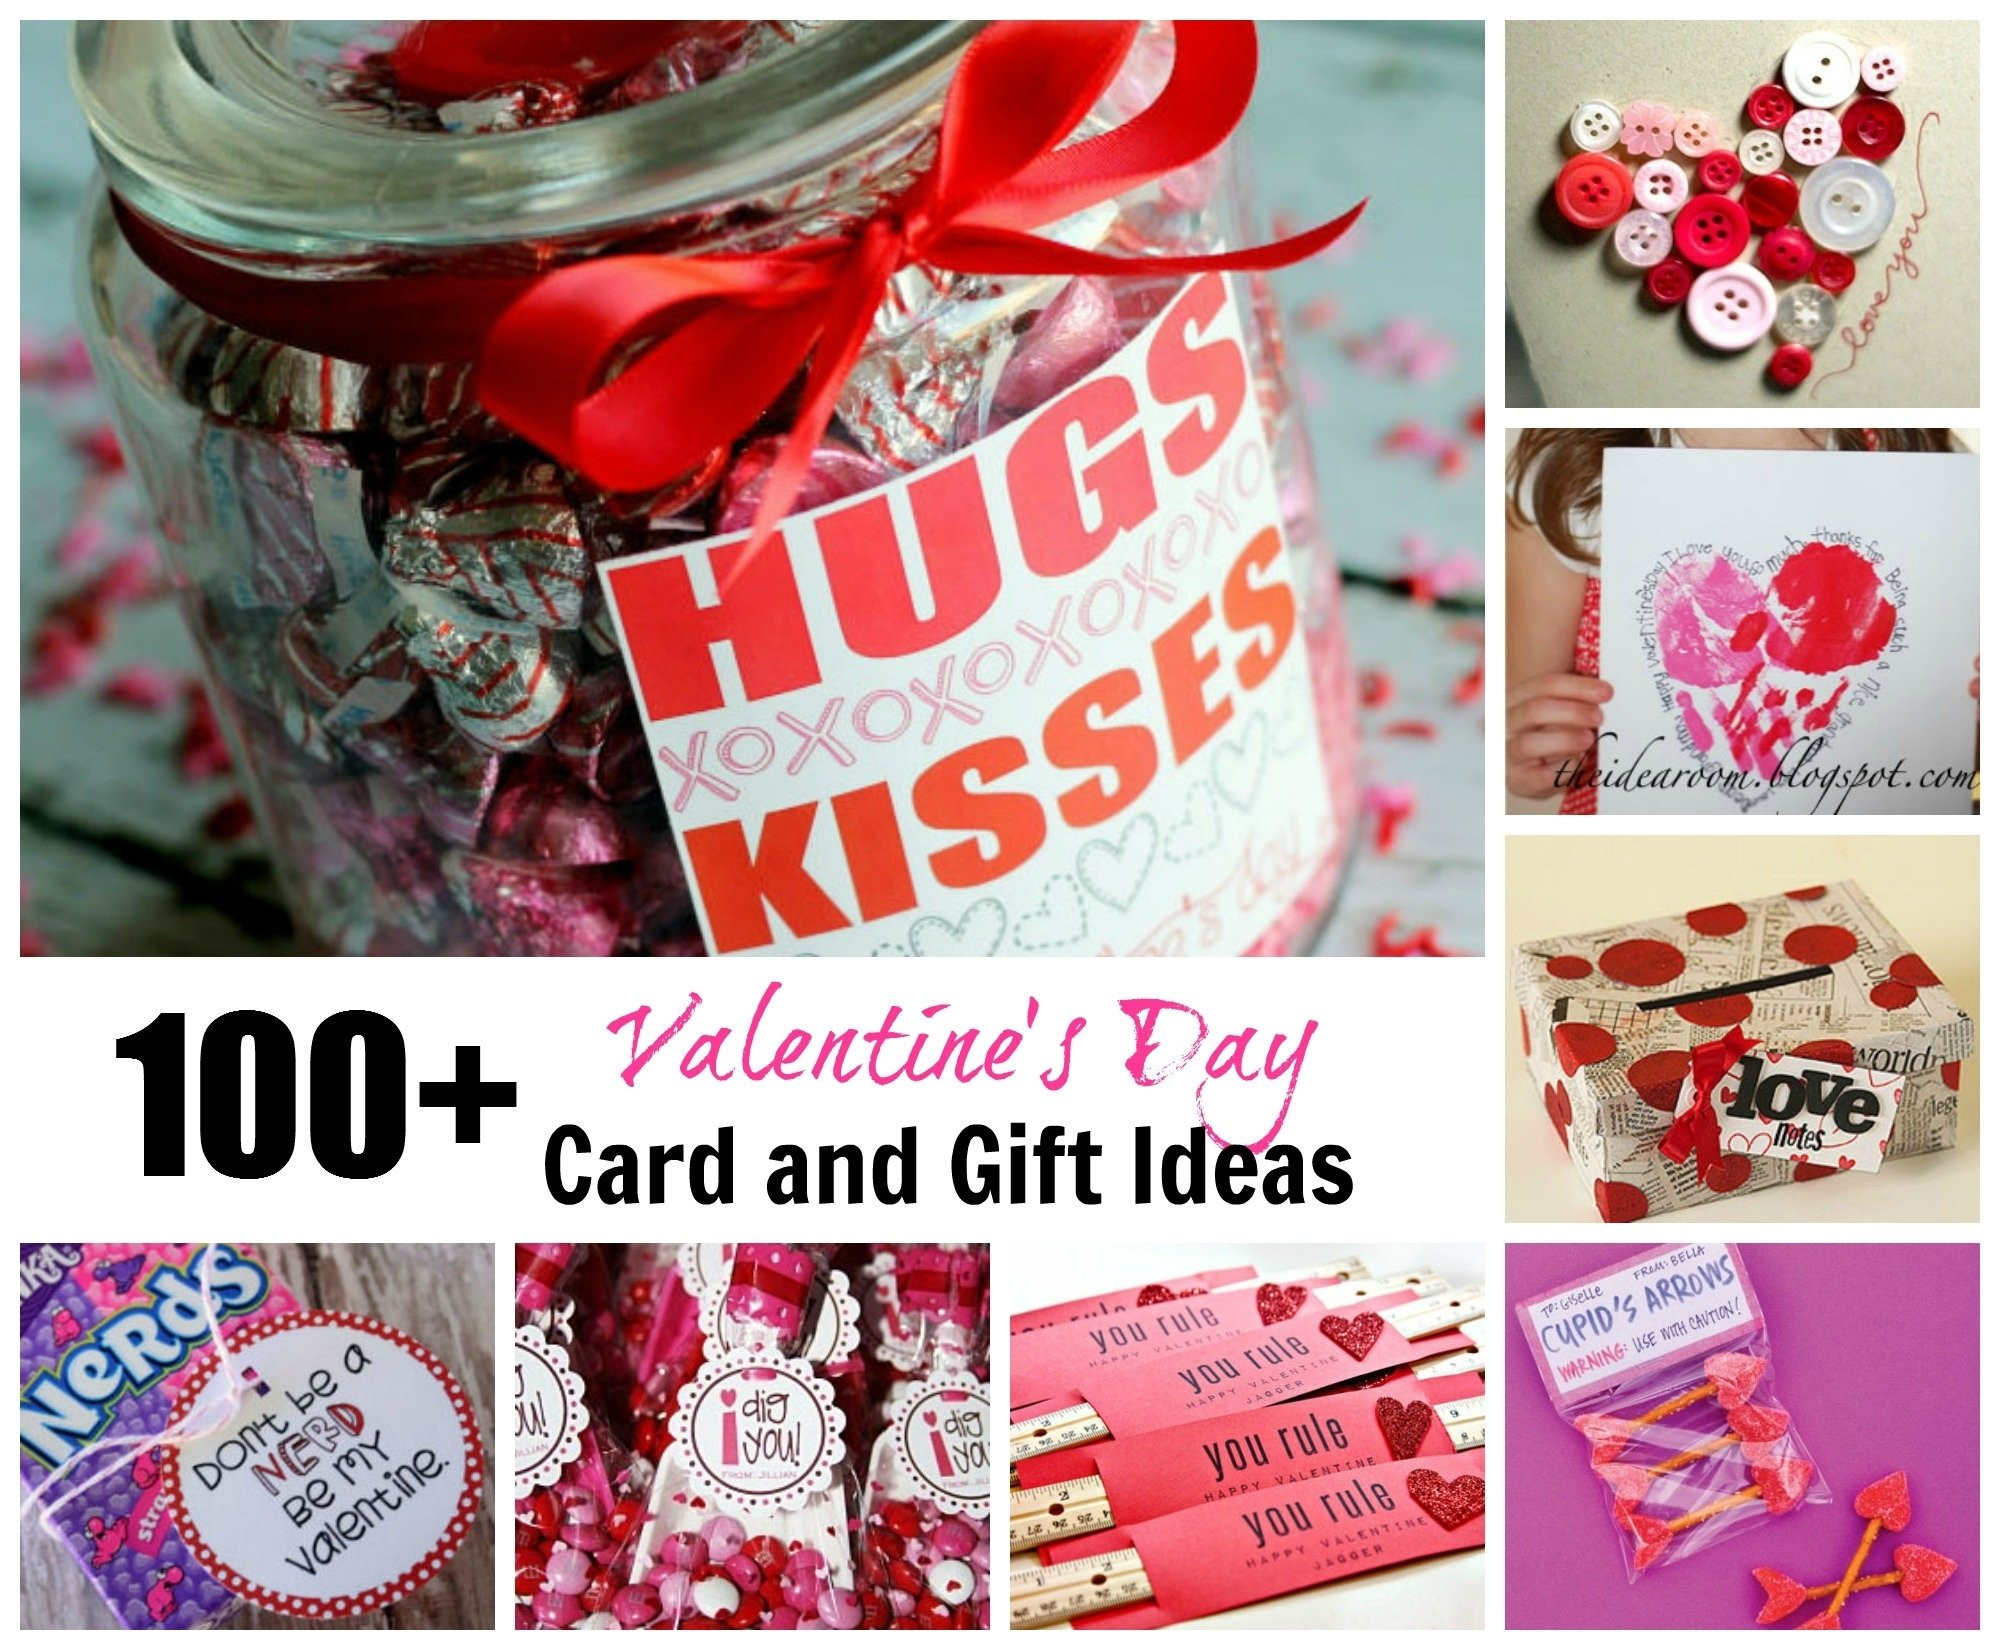 Valentines Day Ideas For Him Homemade
 10 Lovable Homemade Valentines Ideas For Him 2020